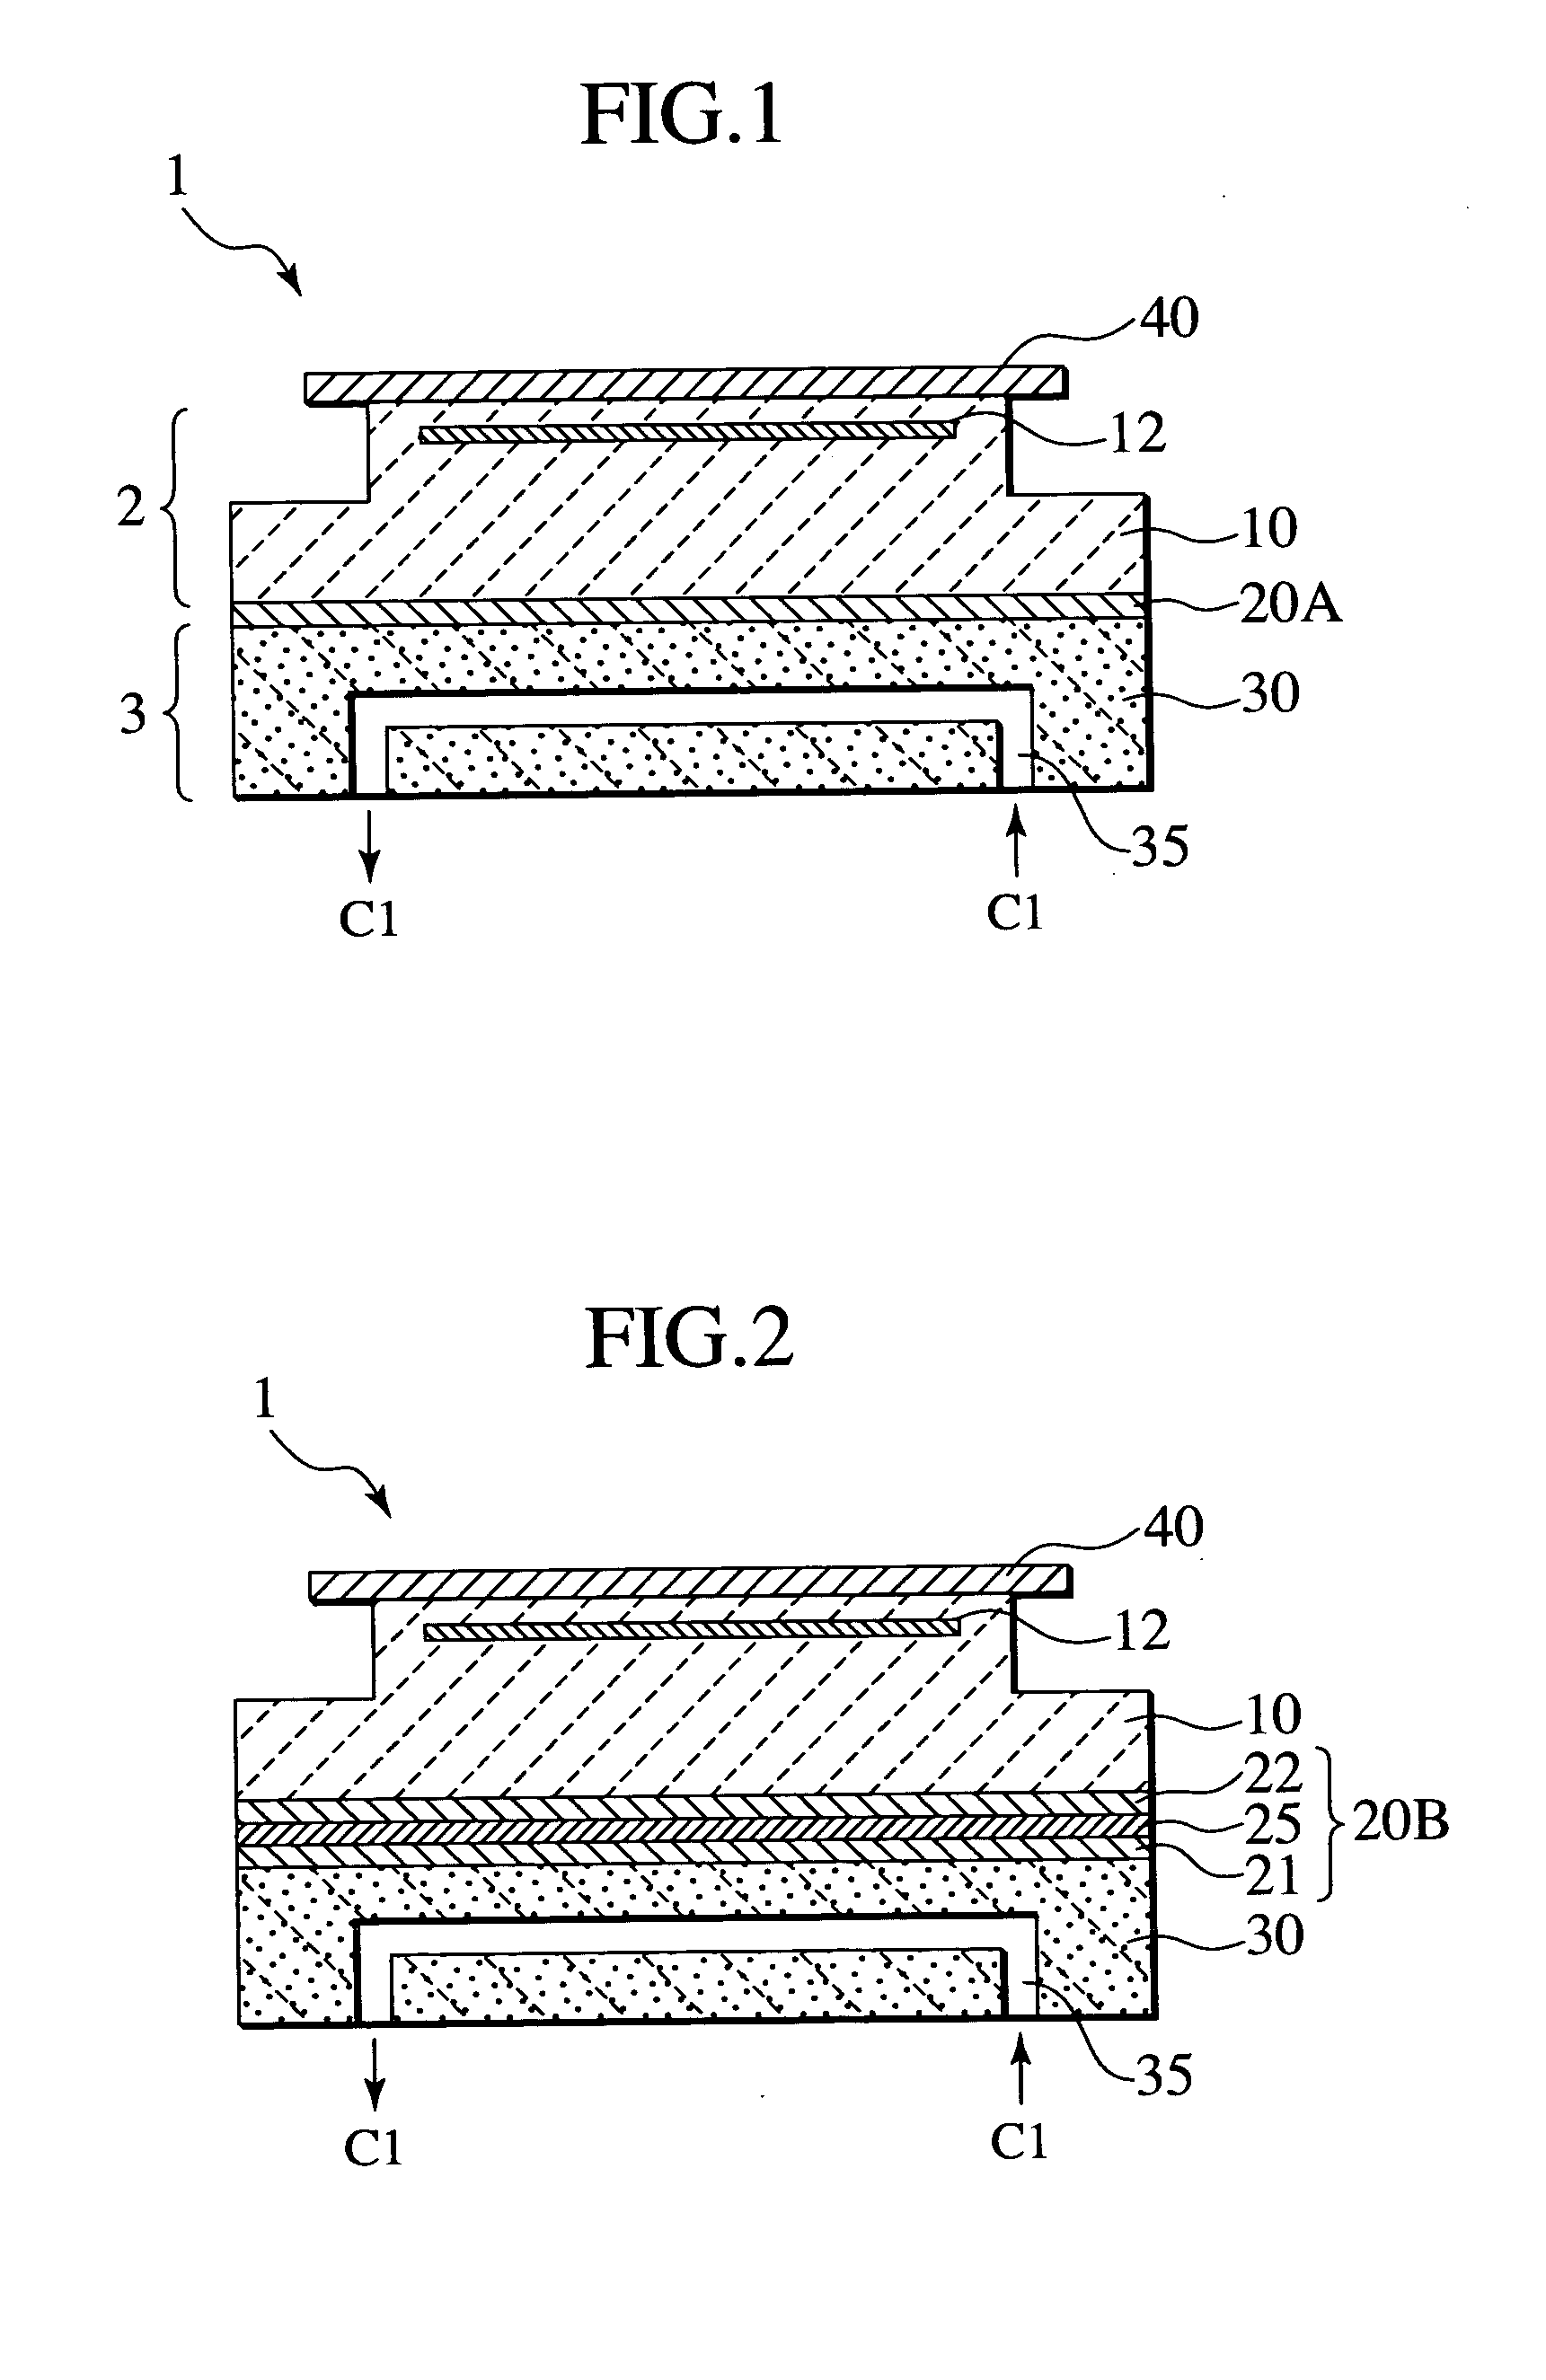 Method of fabricating substrate placing stage